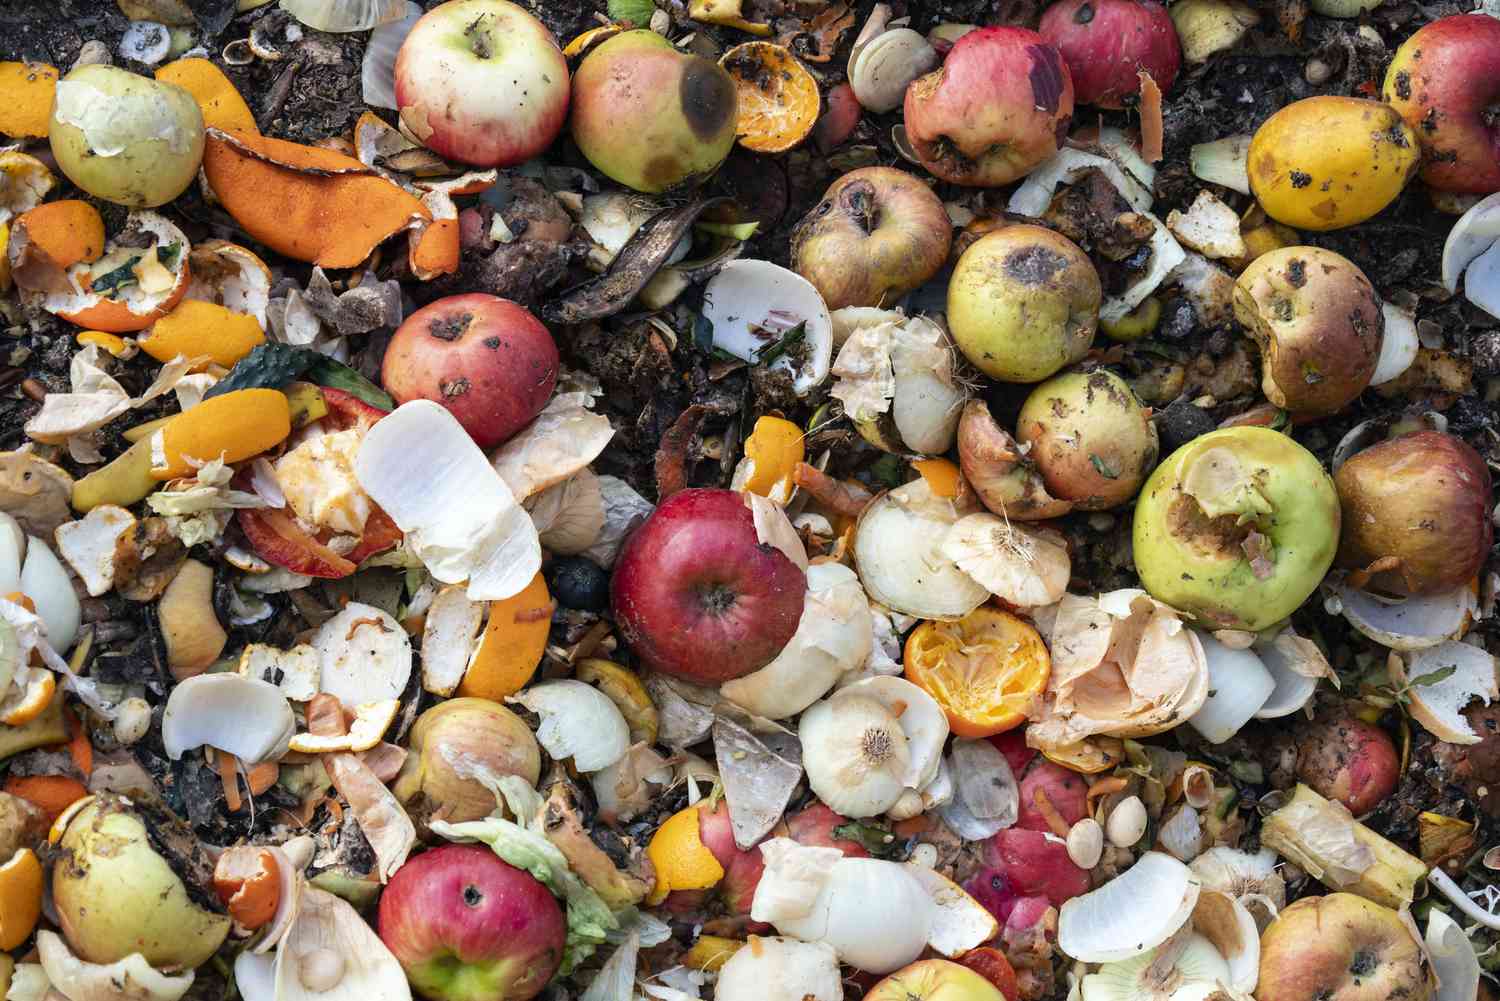 How Organic Waste Affect the Environment